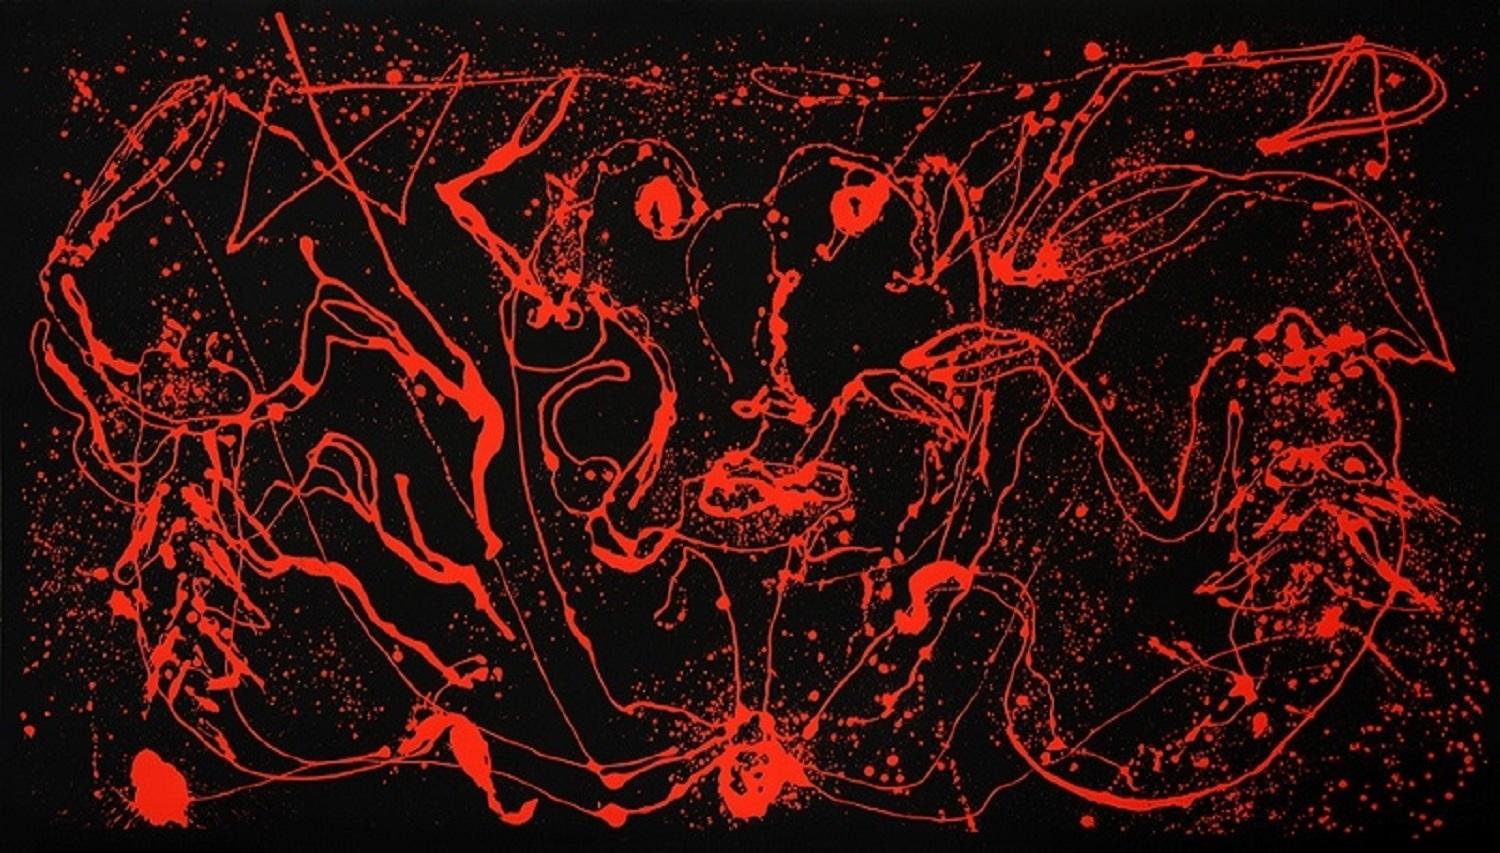 Sergio Hernández (Mexico, 1957)
'Alacranes Rojos', 2016
woodcut on paper Hahnemuhle 350 g.
46.9 x 82.7 in. (119 x 210 cm.)
Edition of 30
ID: HER-201
























